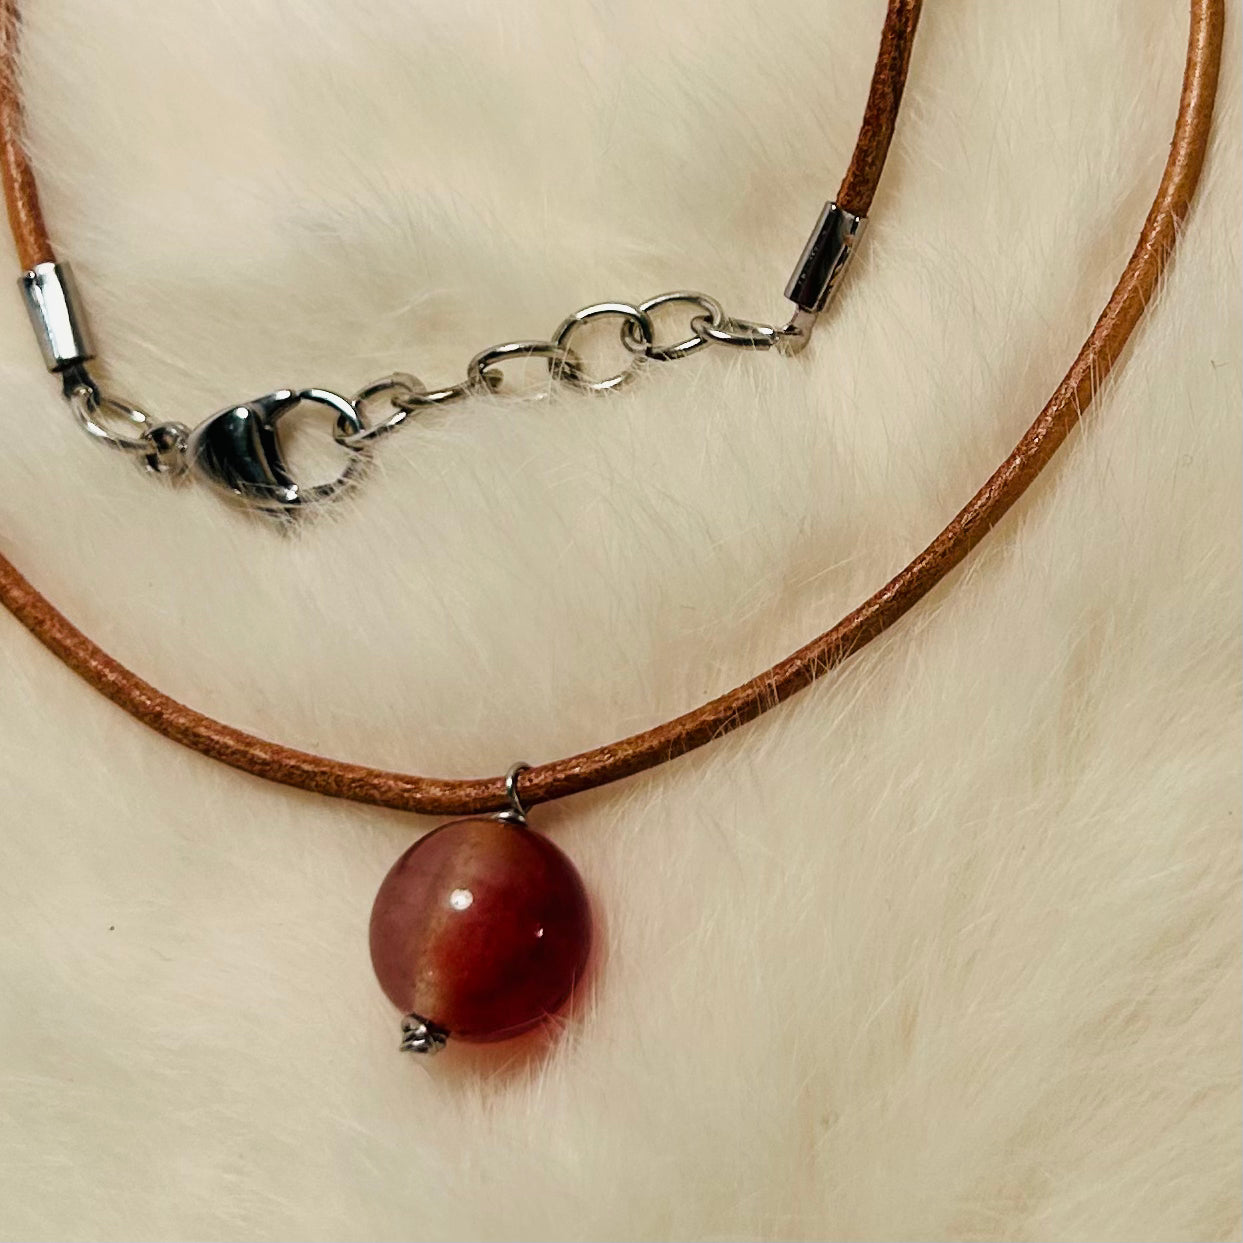 Handmade gemstone pendant necklace, adjustable, with hypoallergenic surgical steel.

Made with genuine leather cordage.